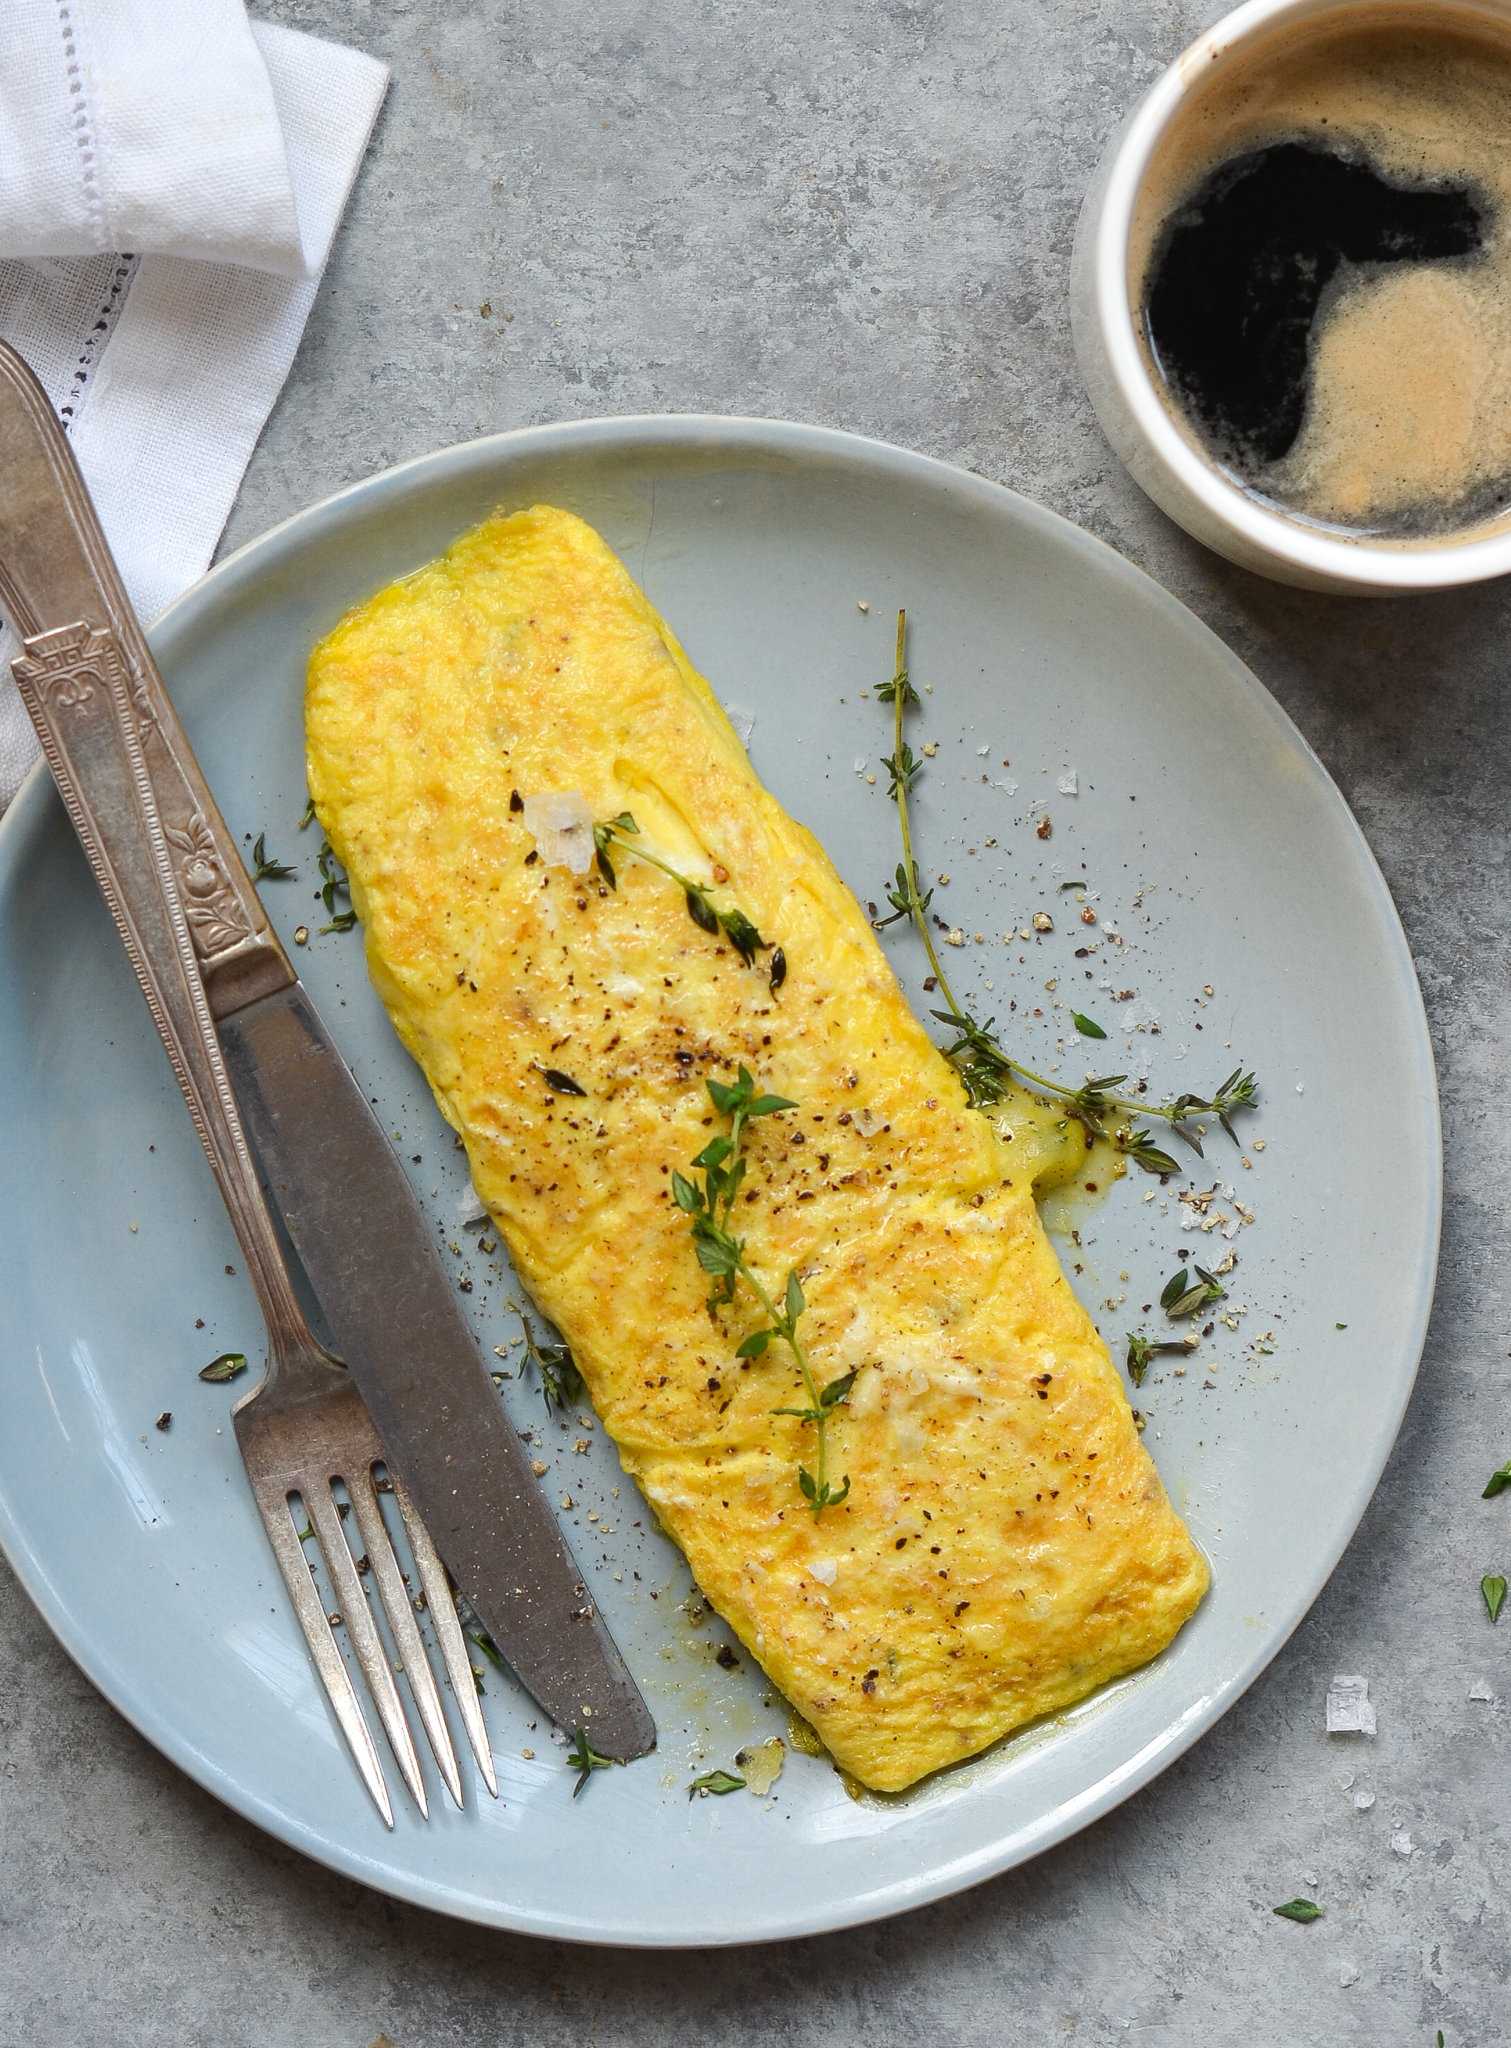 Best Omelette Recipes For A Nutritious And Delicious Breakfast